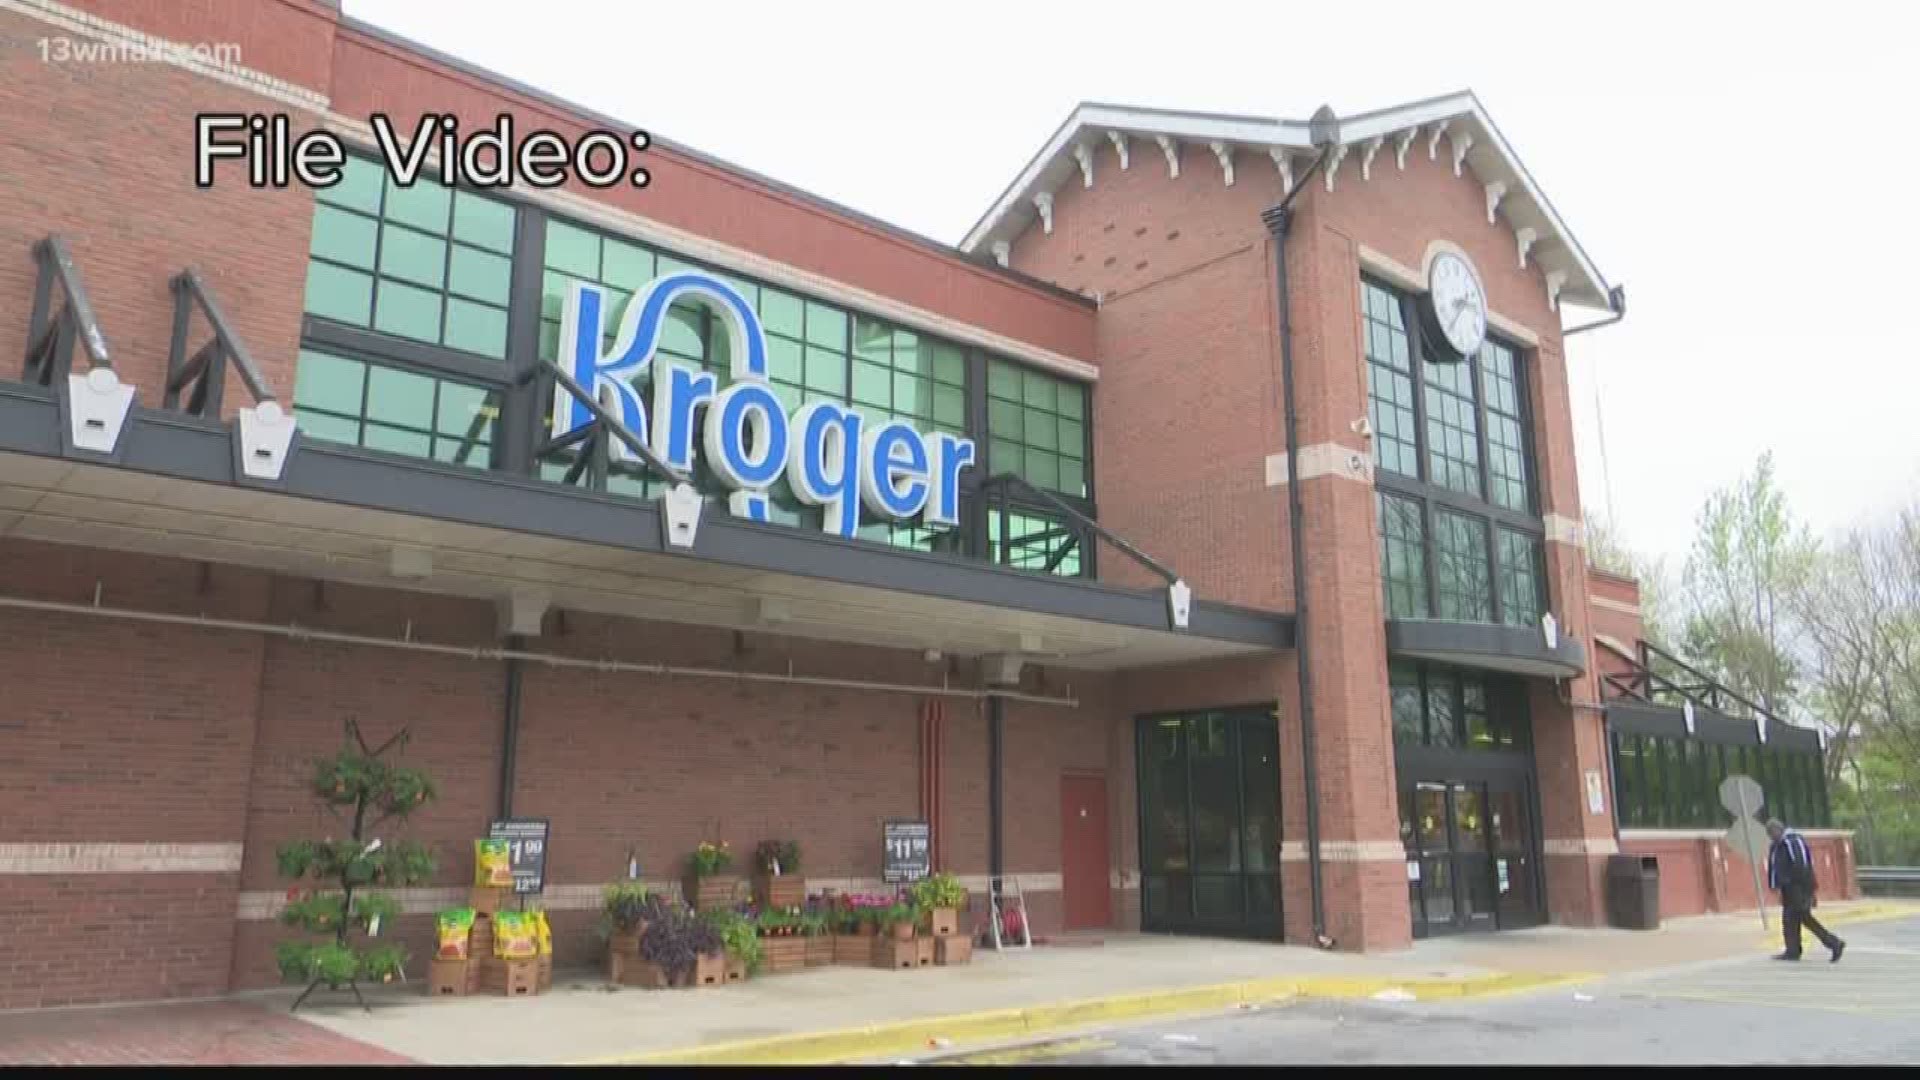 Monday afternoon, a large crowd appeared at the Macon-Bibb Planning and Zoning meeting to oppose a plan for the old Kroger building on Pio Nono Avenue.